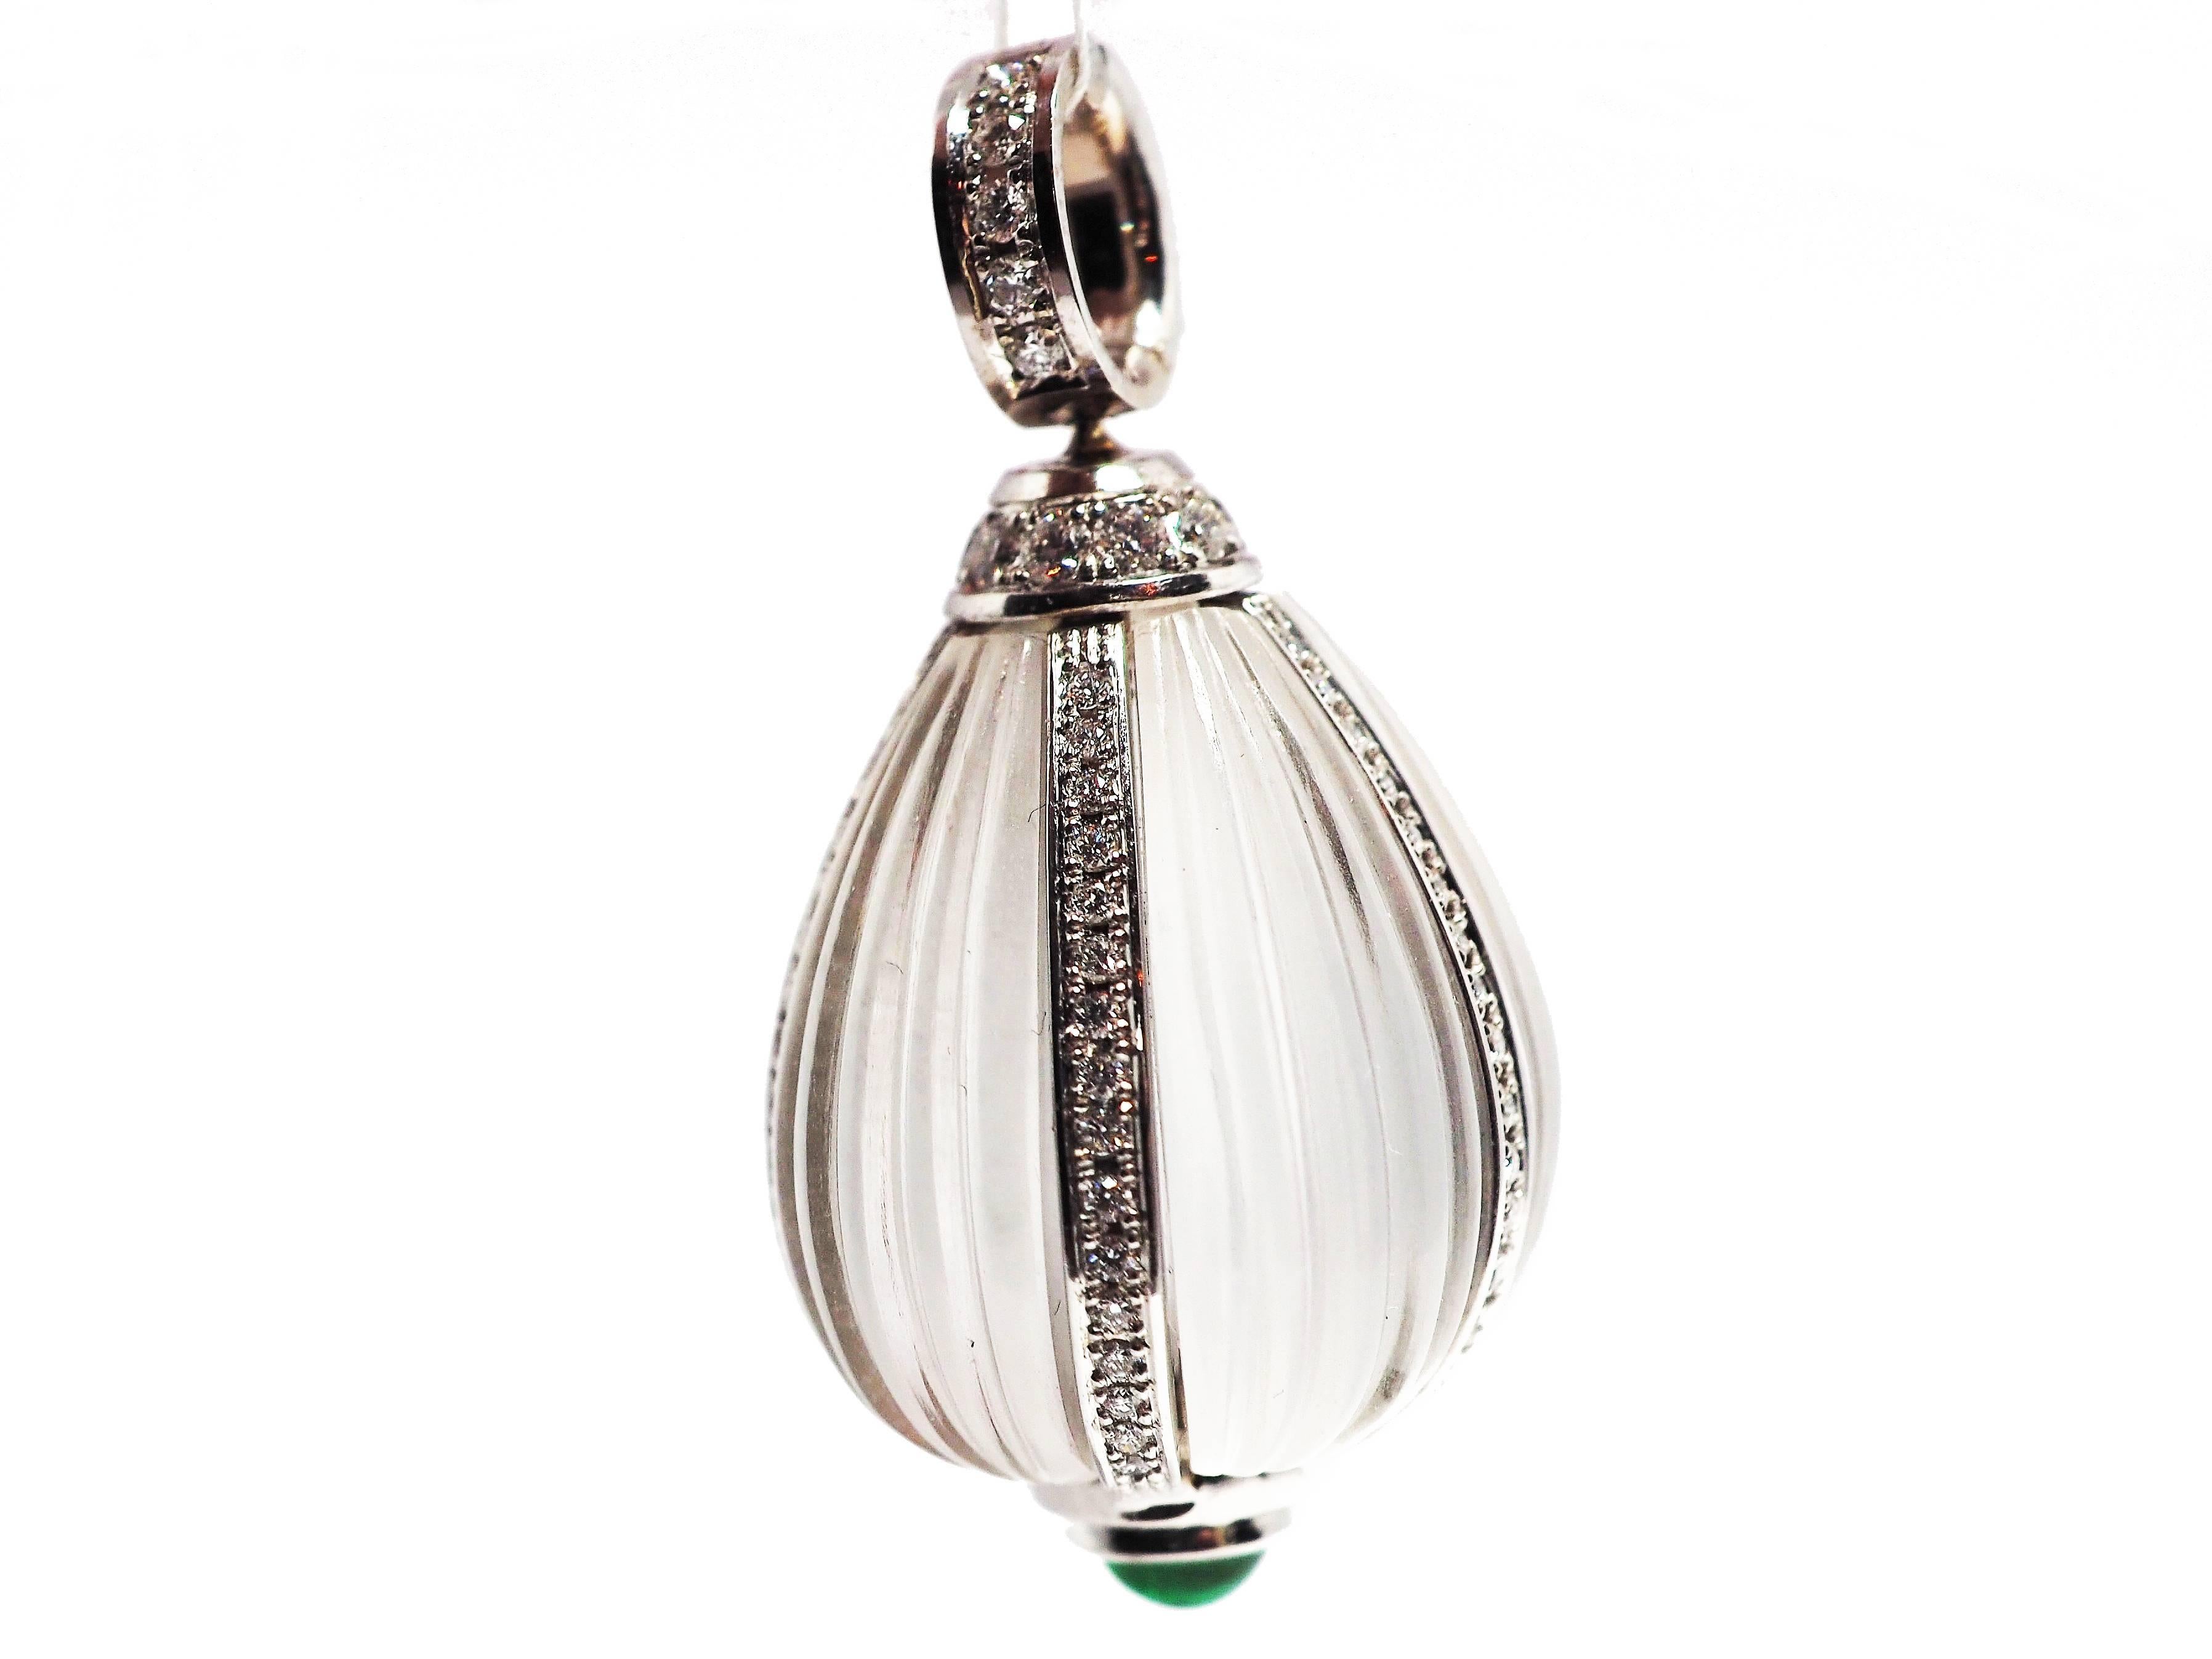 New from the Leyser London collection – Le Touch

An exquisite pendant with a mysterious heart.  The craftsman encased a perfect, carved rock crystal within bands of 18k white gold, and placed a athomless green emerald cabochon drop at its base. The